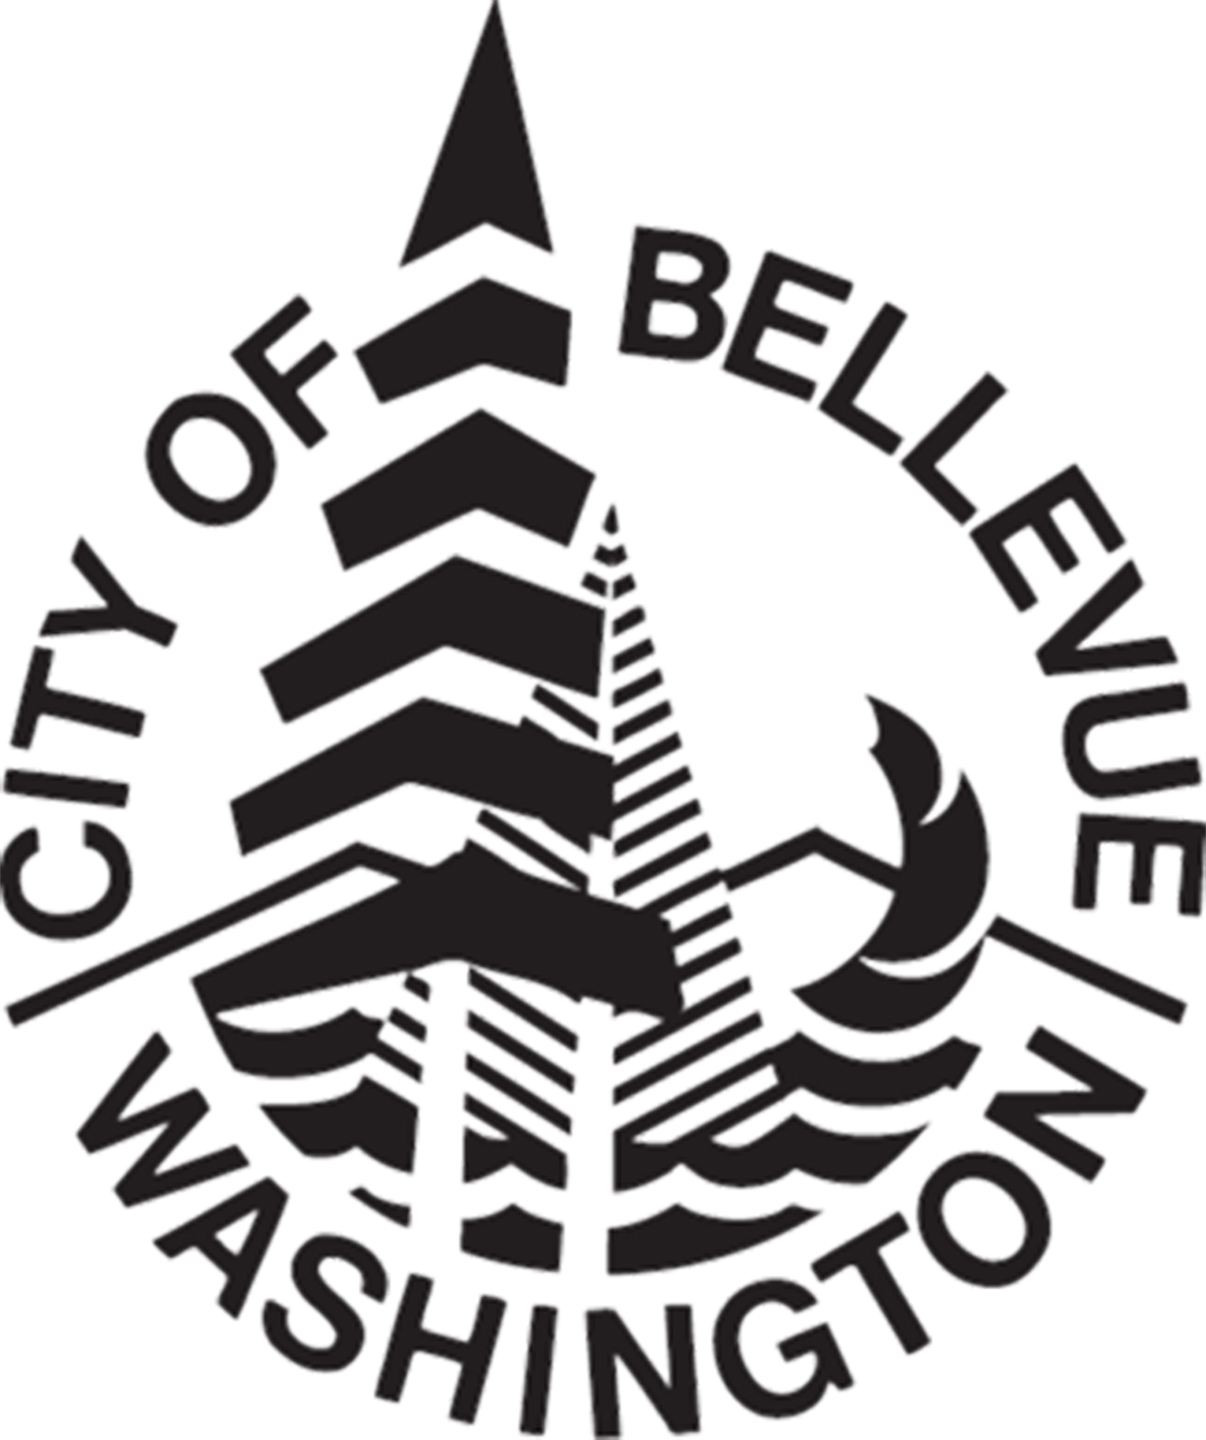 Commission recommends 45 percent raise in Bellevue Council salaries